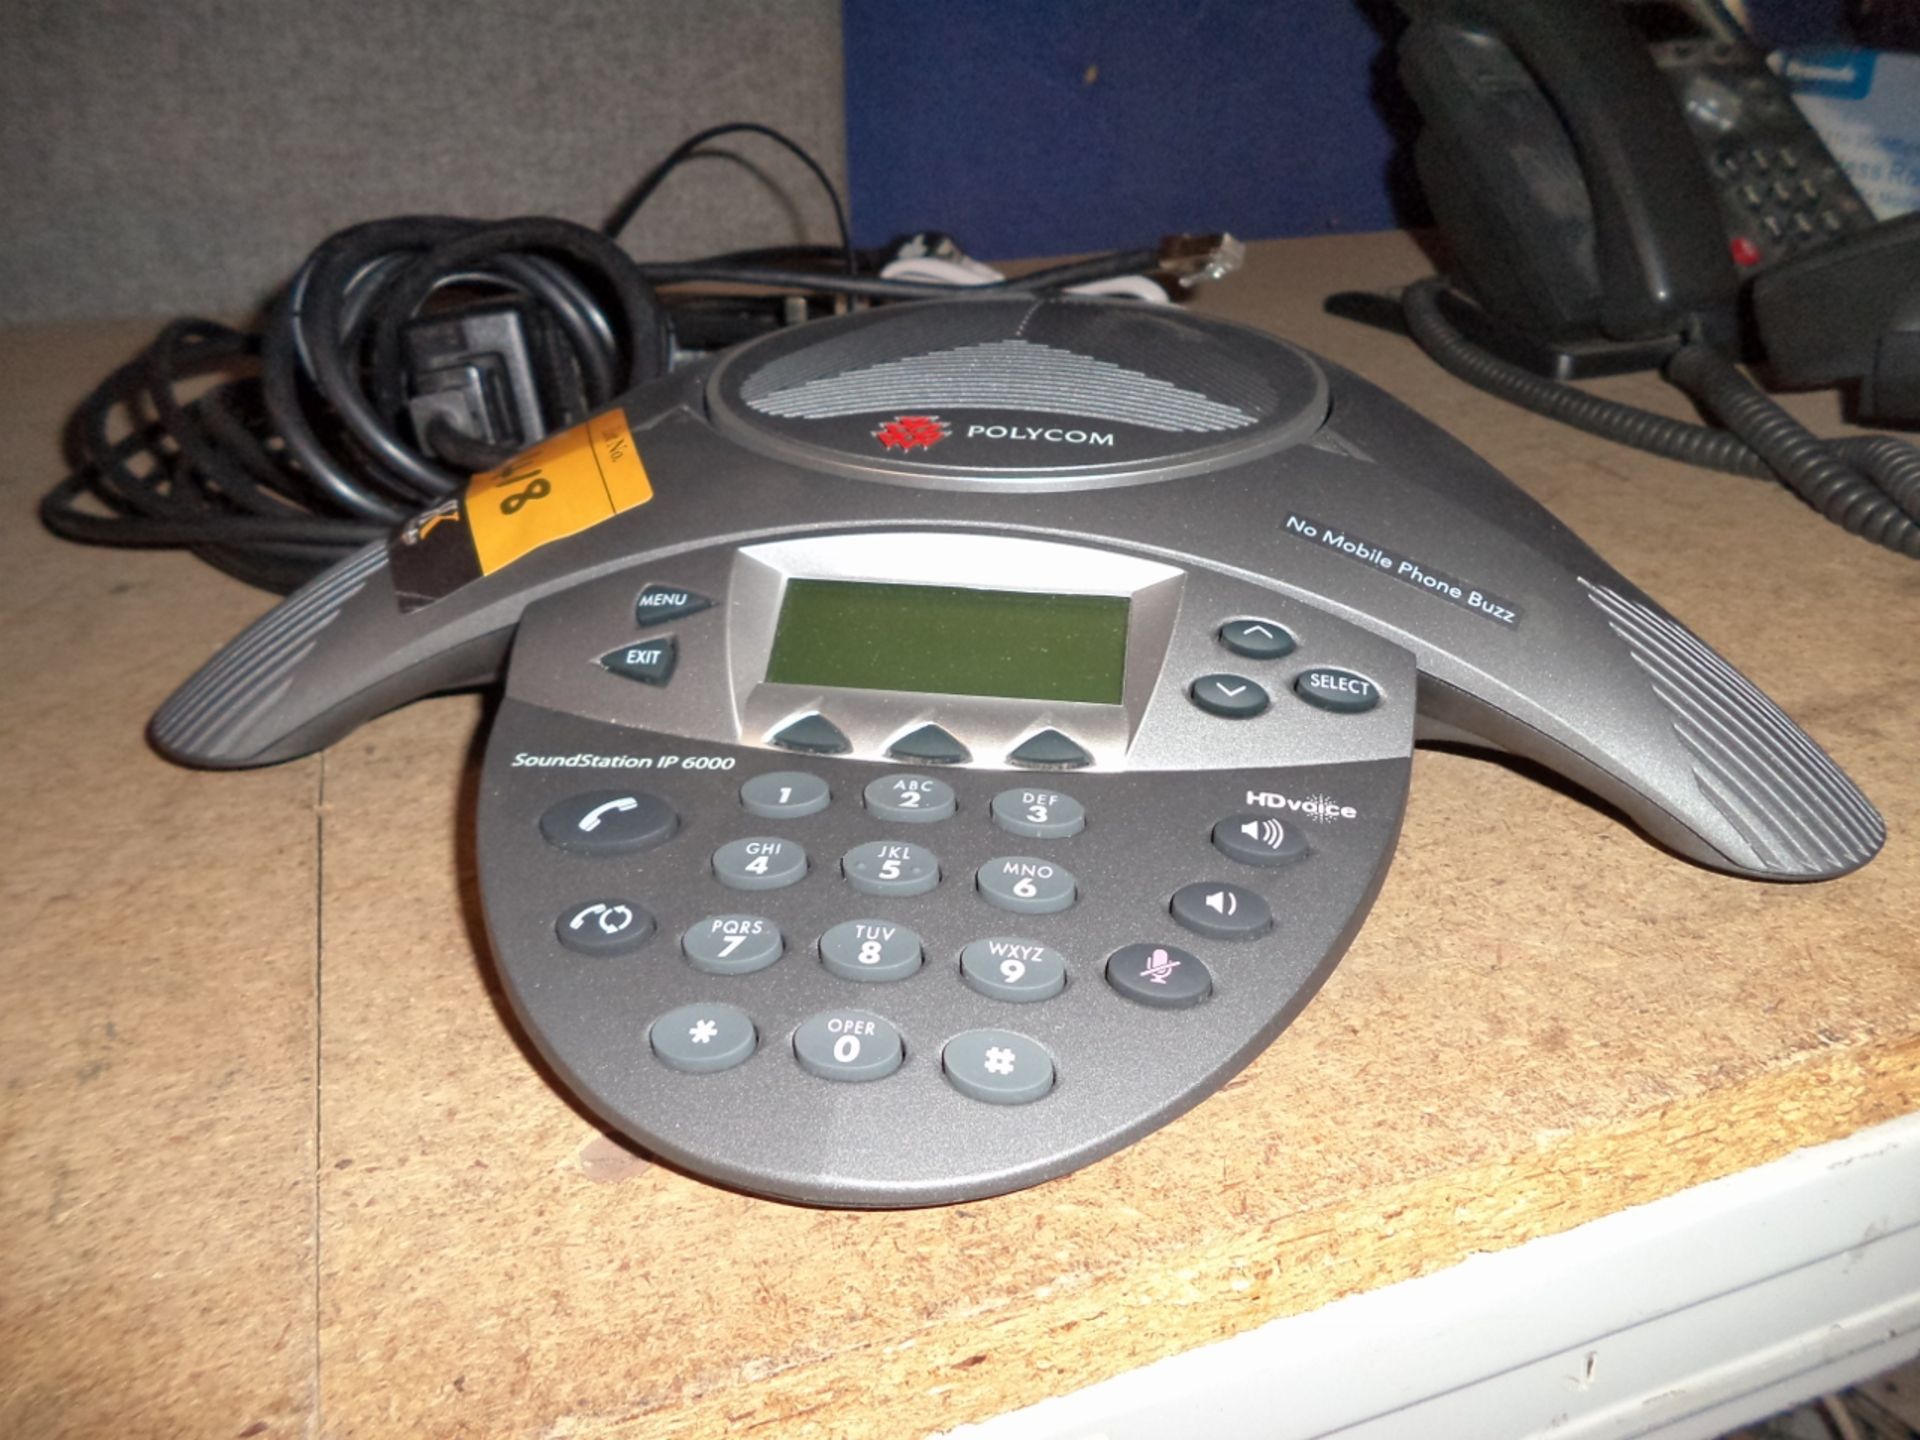 Polycom Sound Station IP6000 VOIP conference phone, with HD voice, no mobile phone buzz, the - Image 5 of 5